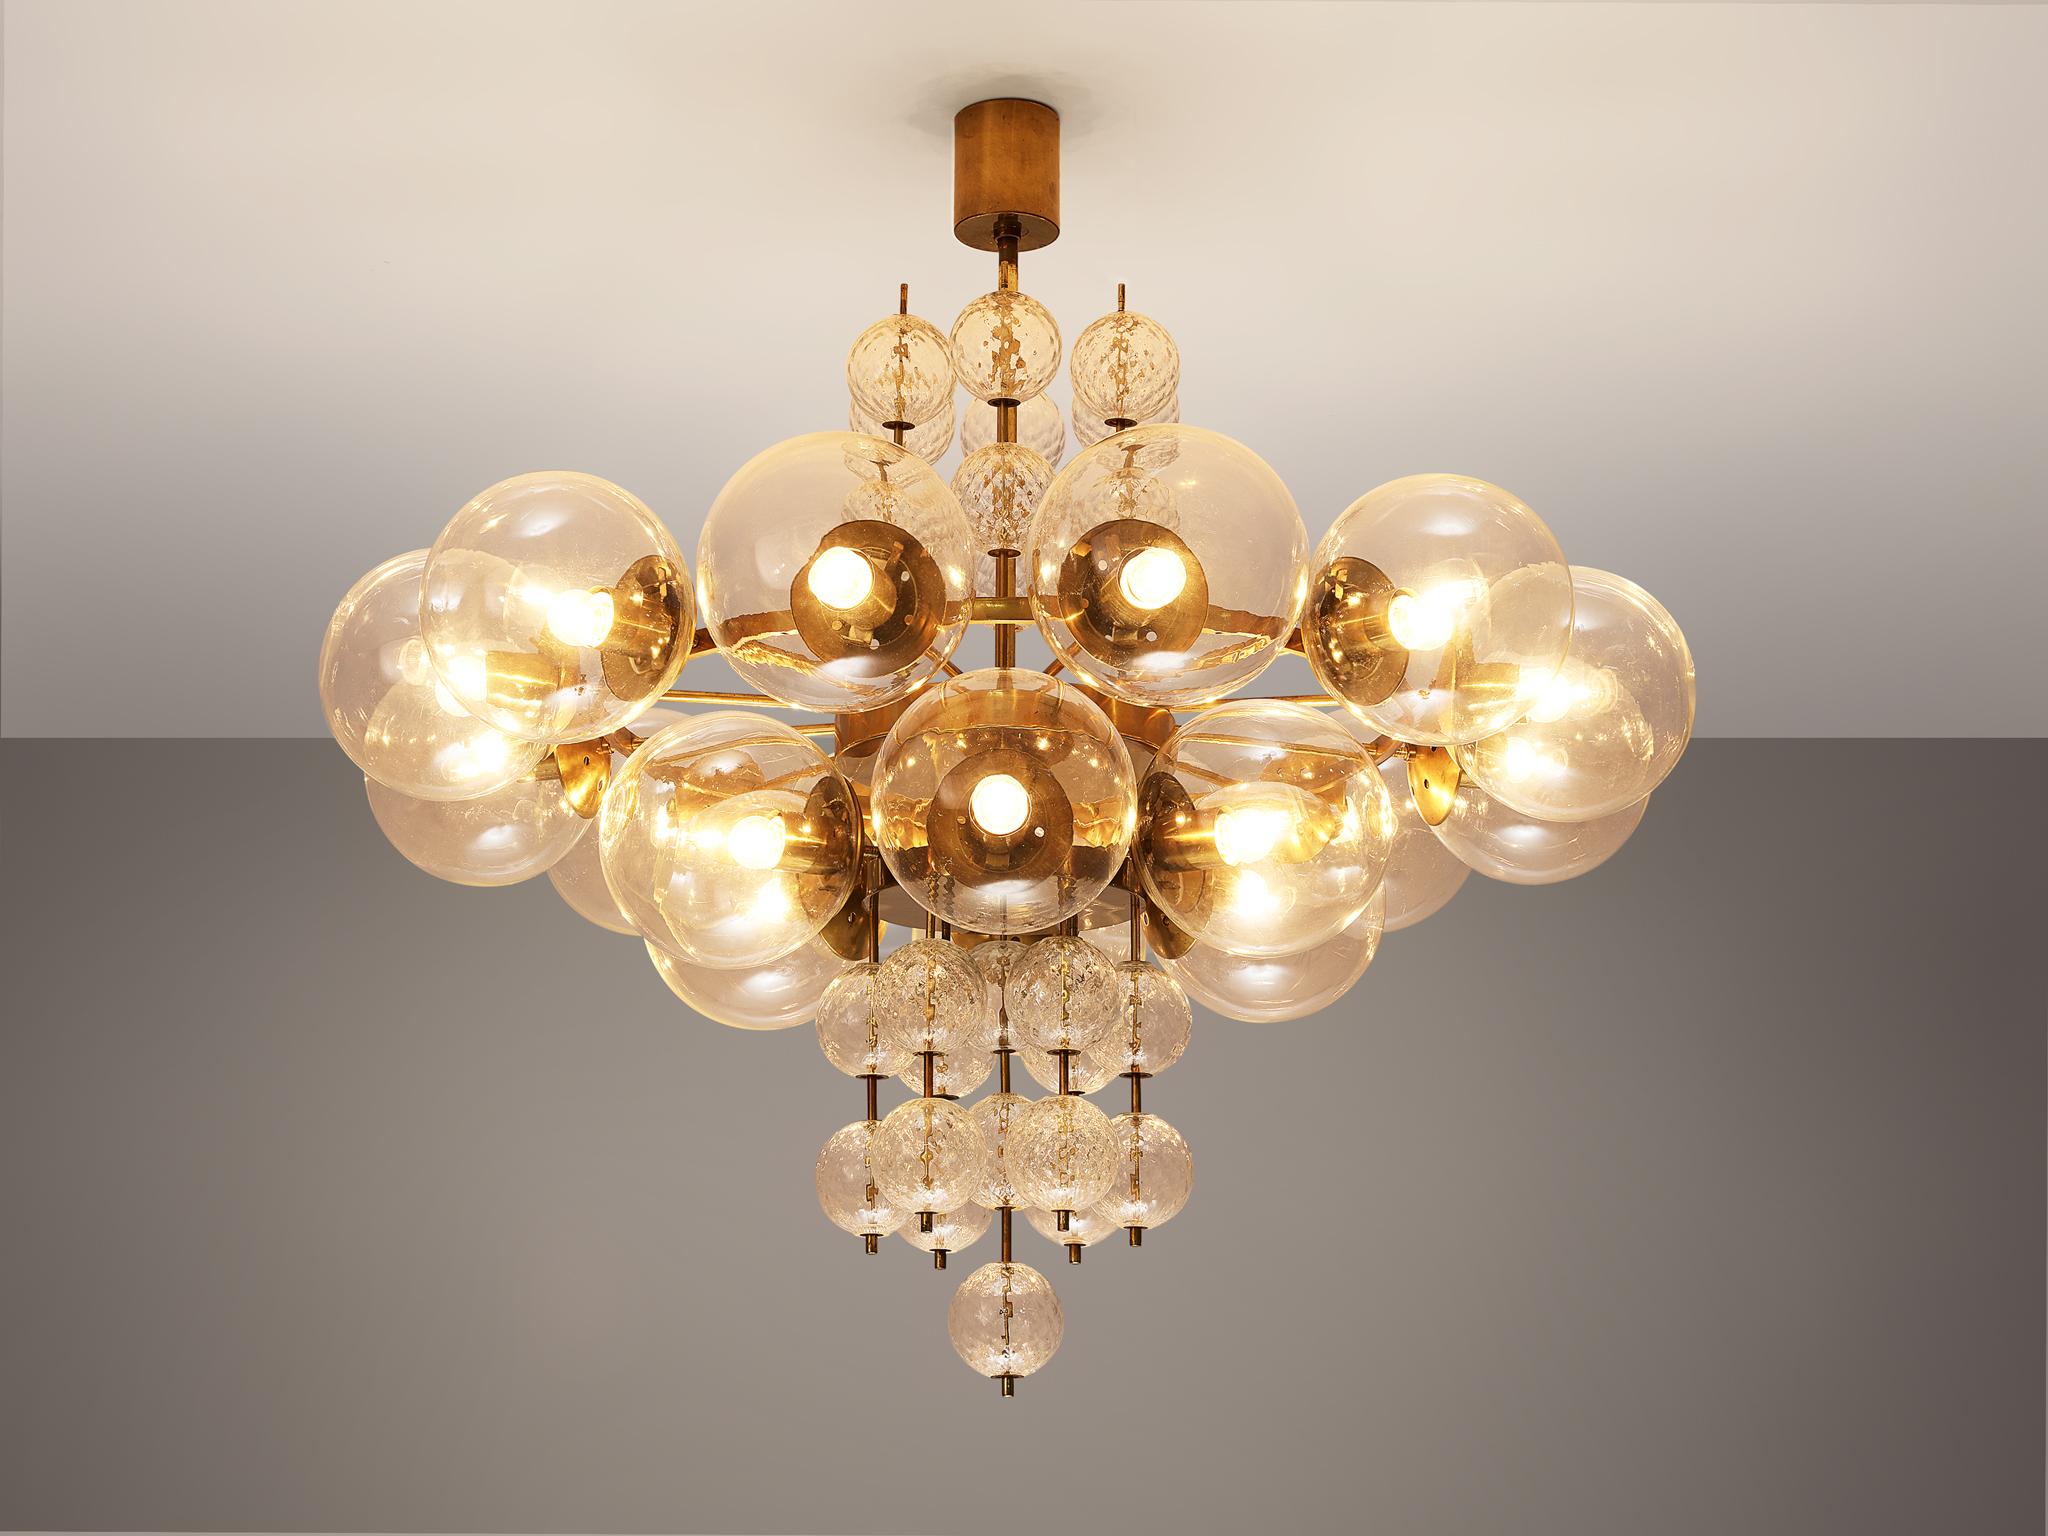 Chandelier, glass and brass, Czech Republic, 1960s

Large chandelier with a combination of big glass spheres which are hanged in two horizontal rows. The smaller glass spheres are made out of structured glass and hanged vertical. The chandelier is